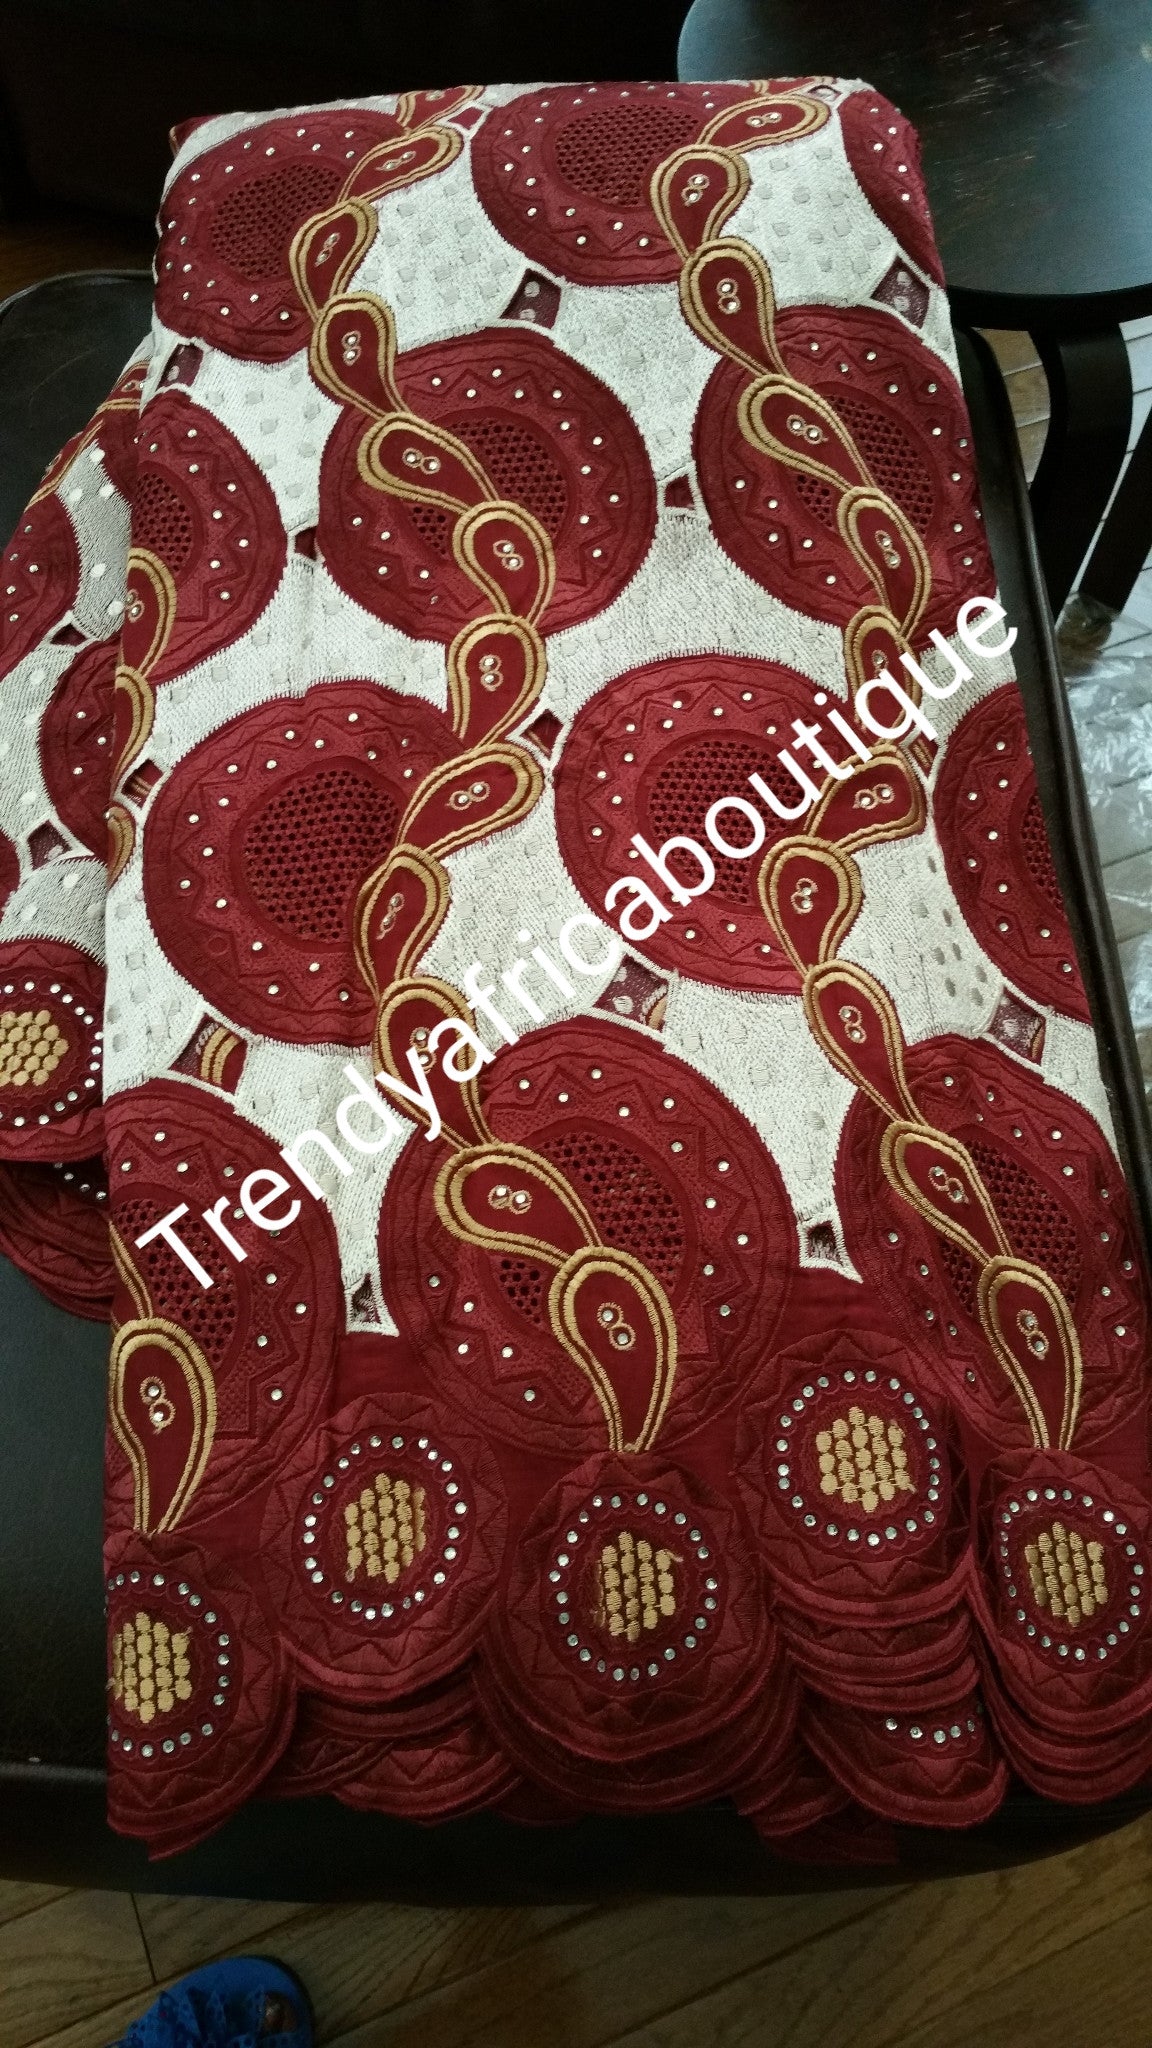 Maroon Red/Gold embroidery swiss voile lace fabric for making Nigerian traditional wedding dress